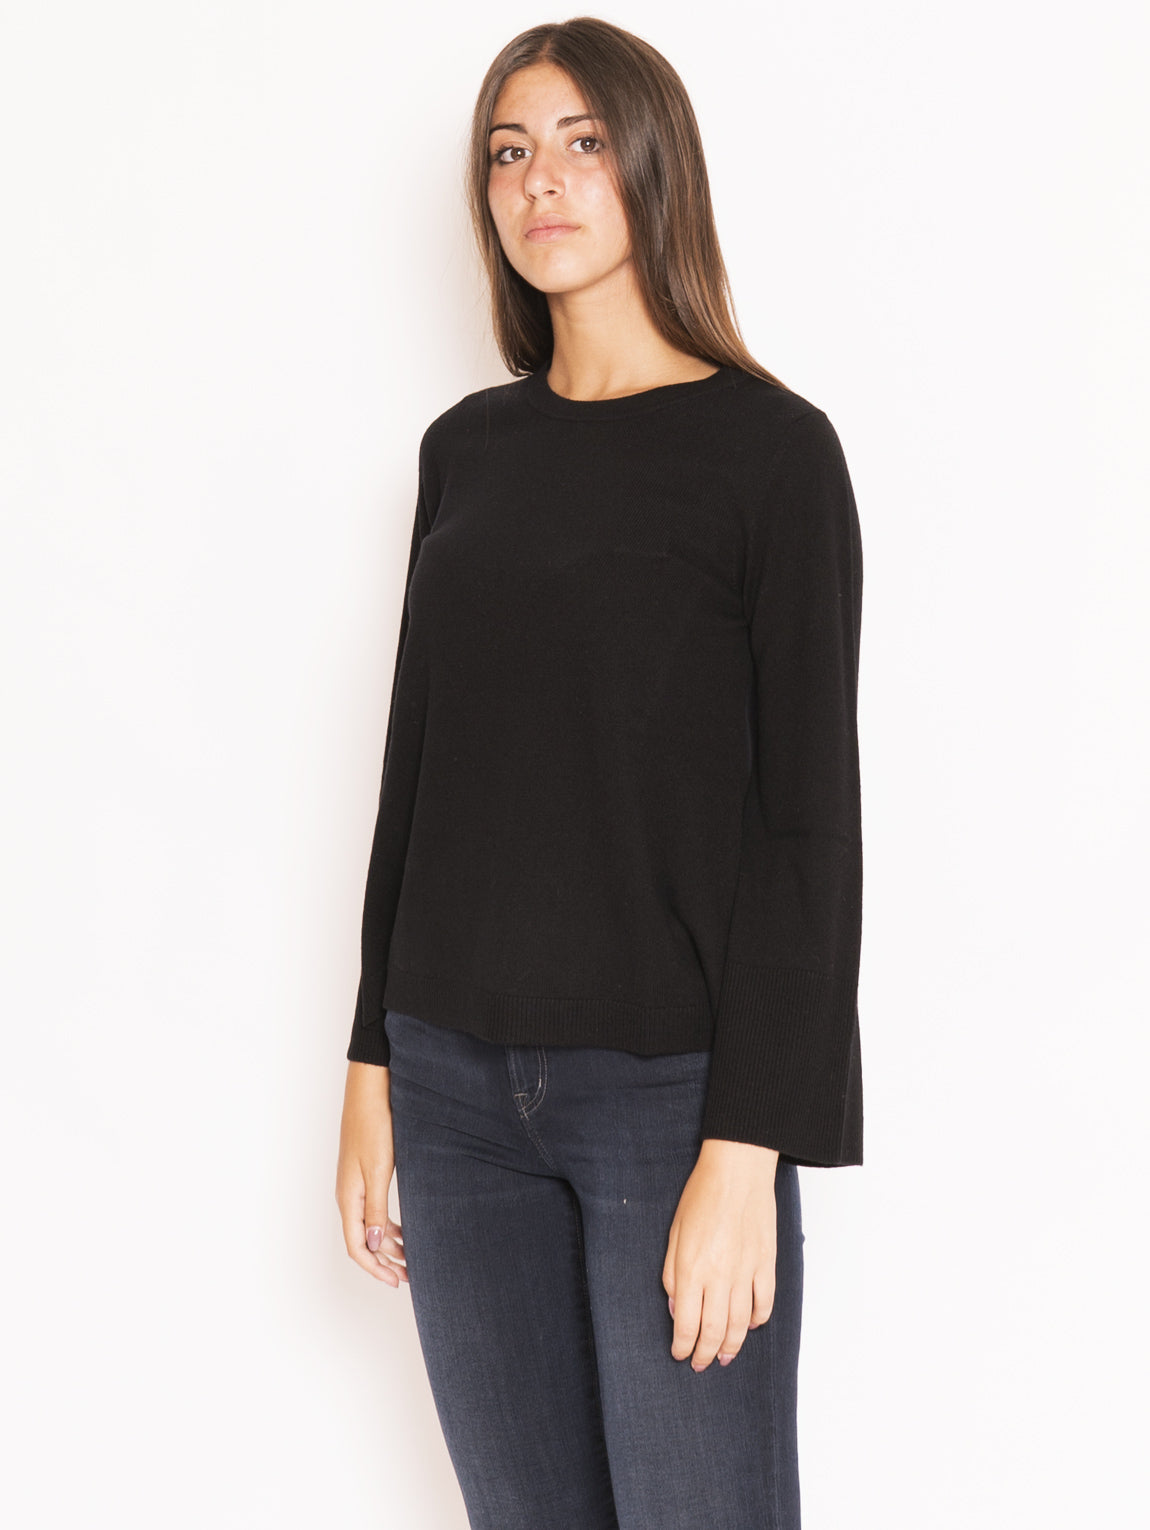 Sweater with maxi cuff in Black wool blend